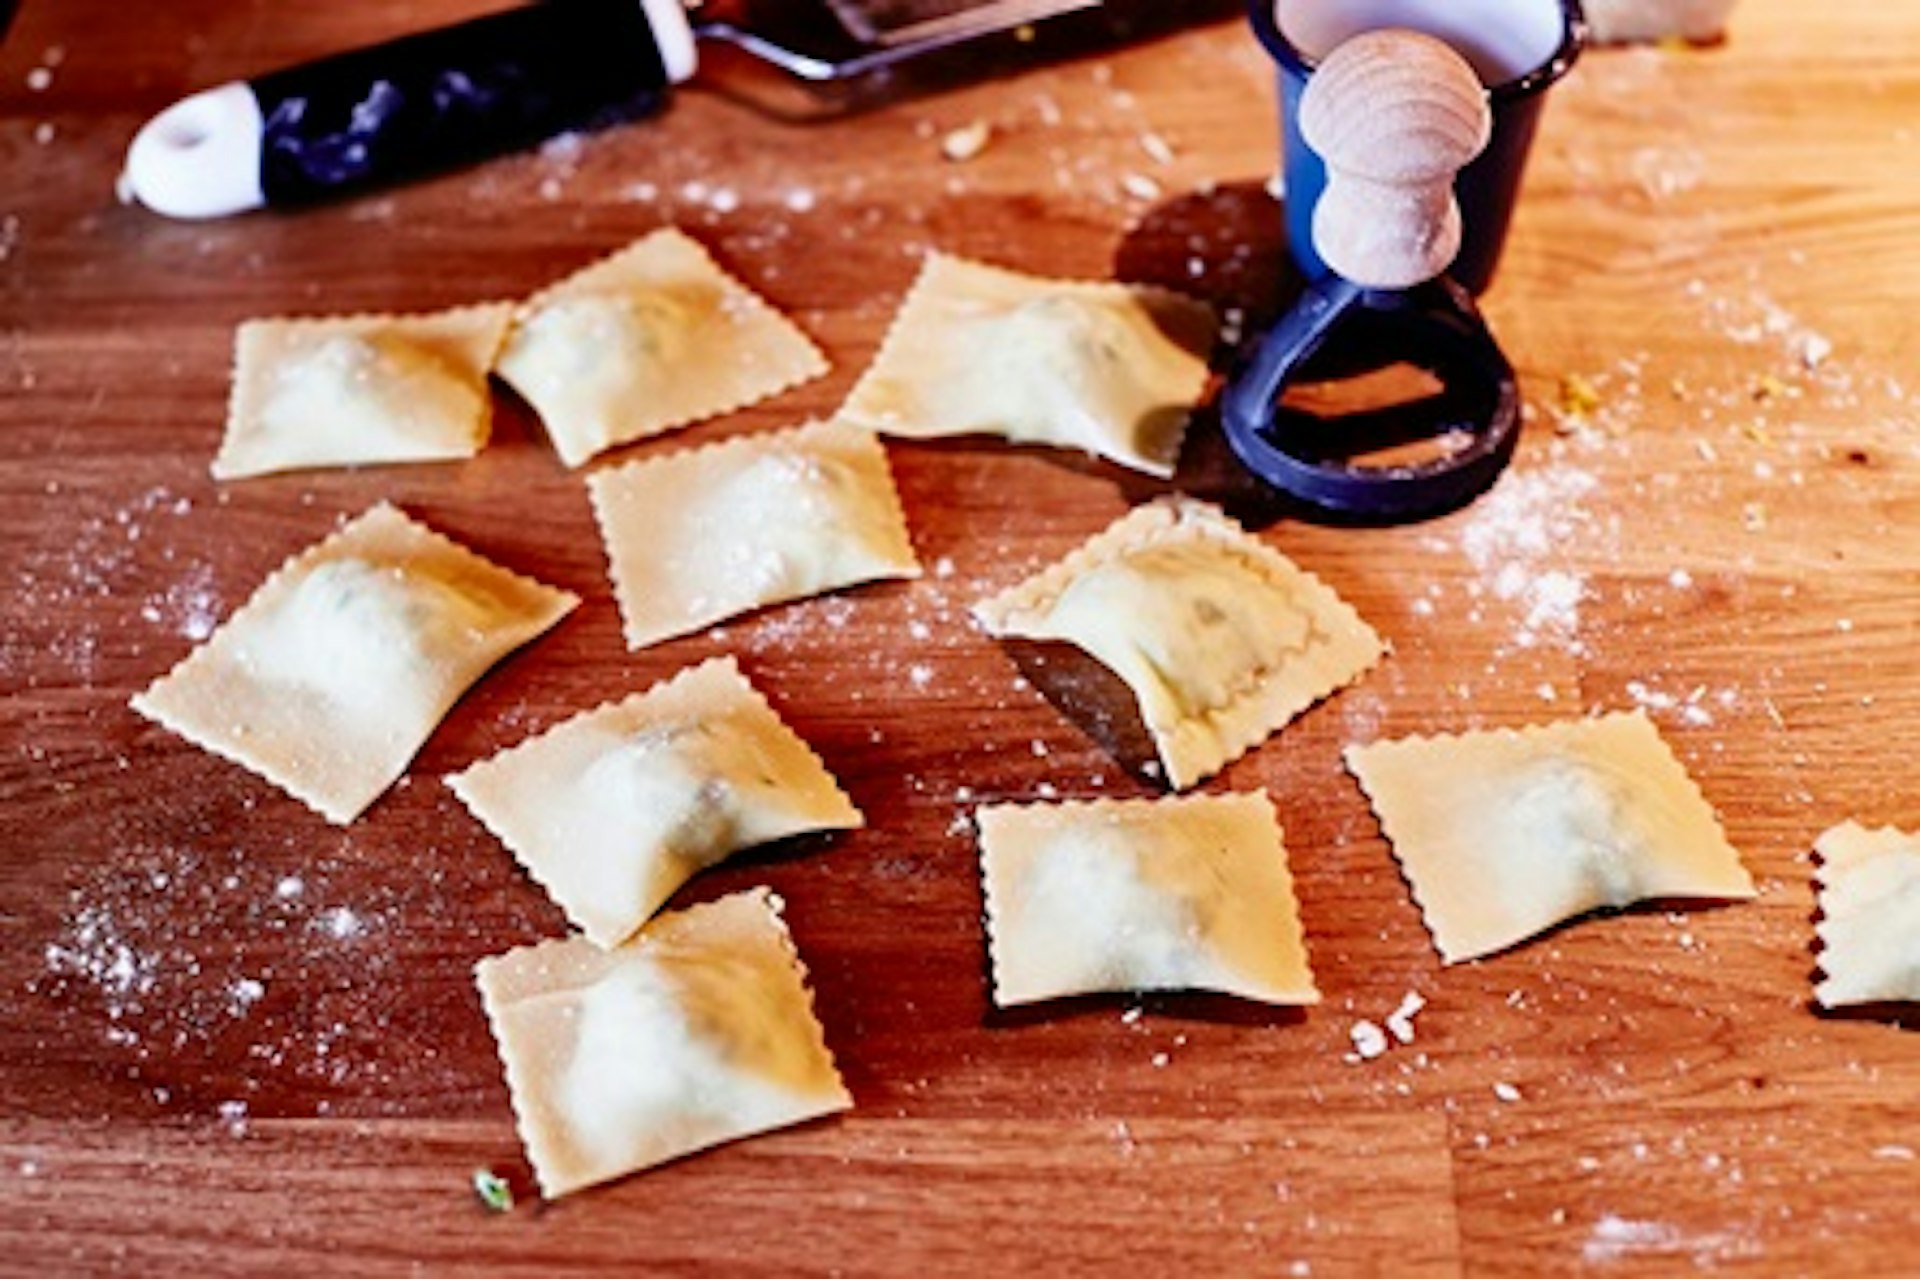 Showstopping Ravioli Class at The Jamie Oliver Cookery School